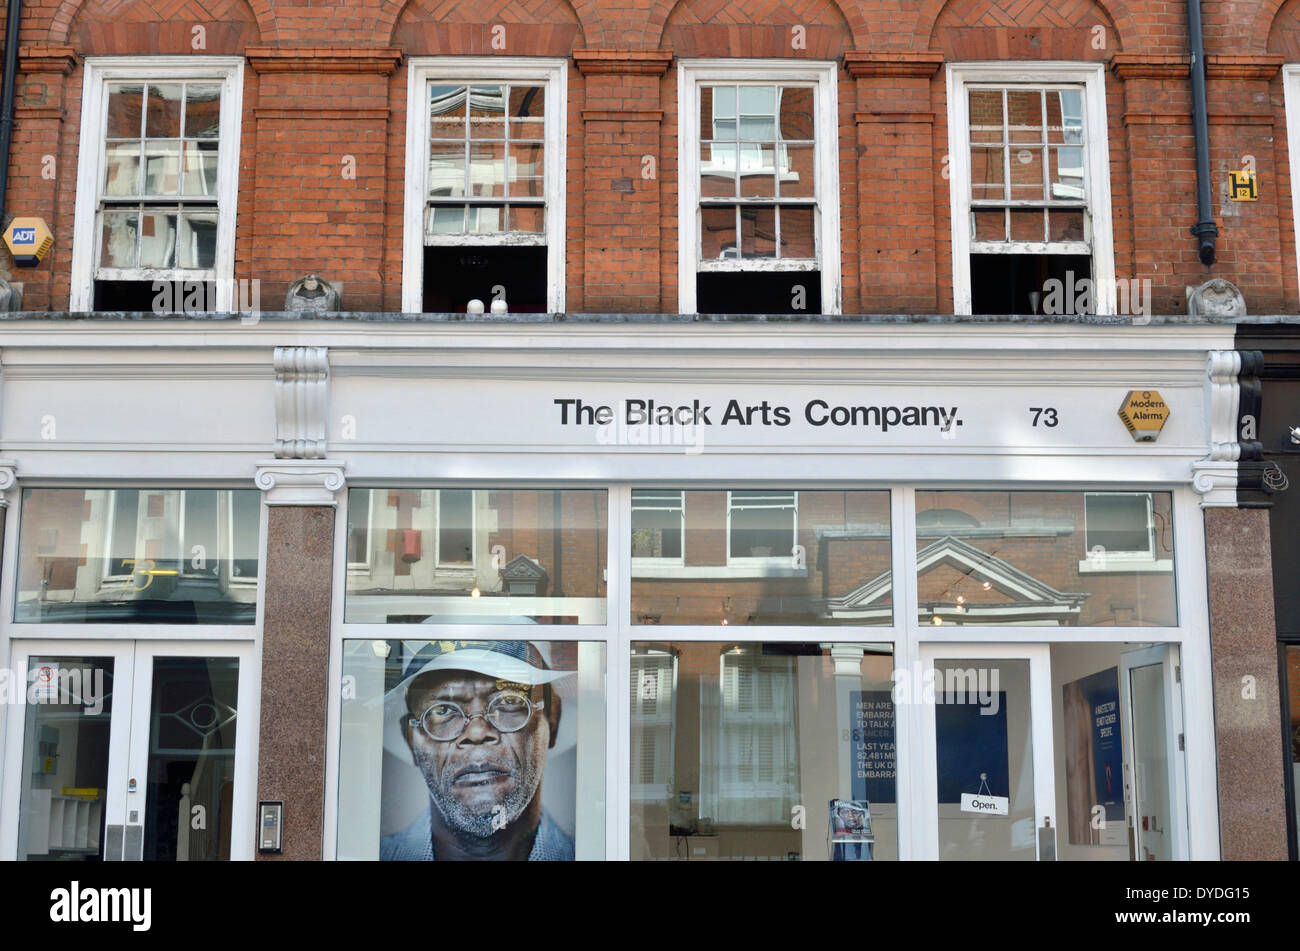 The Black Arts Company in Great Titchfield Street. Stock Photo